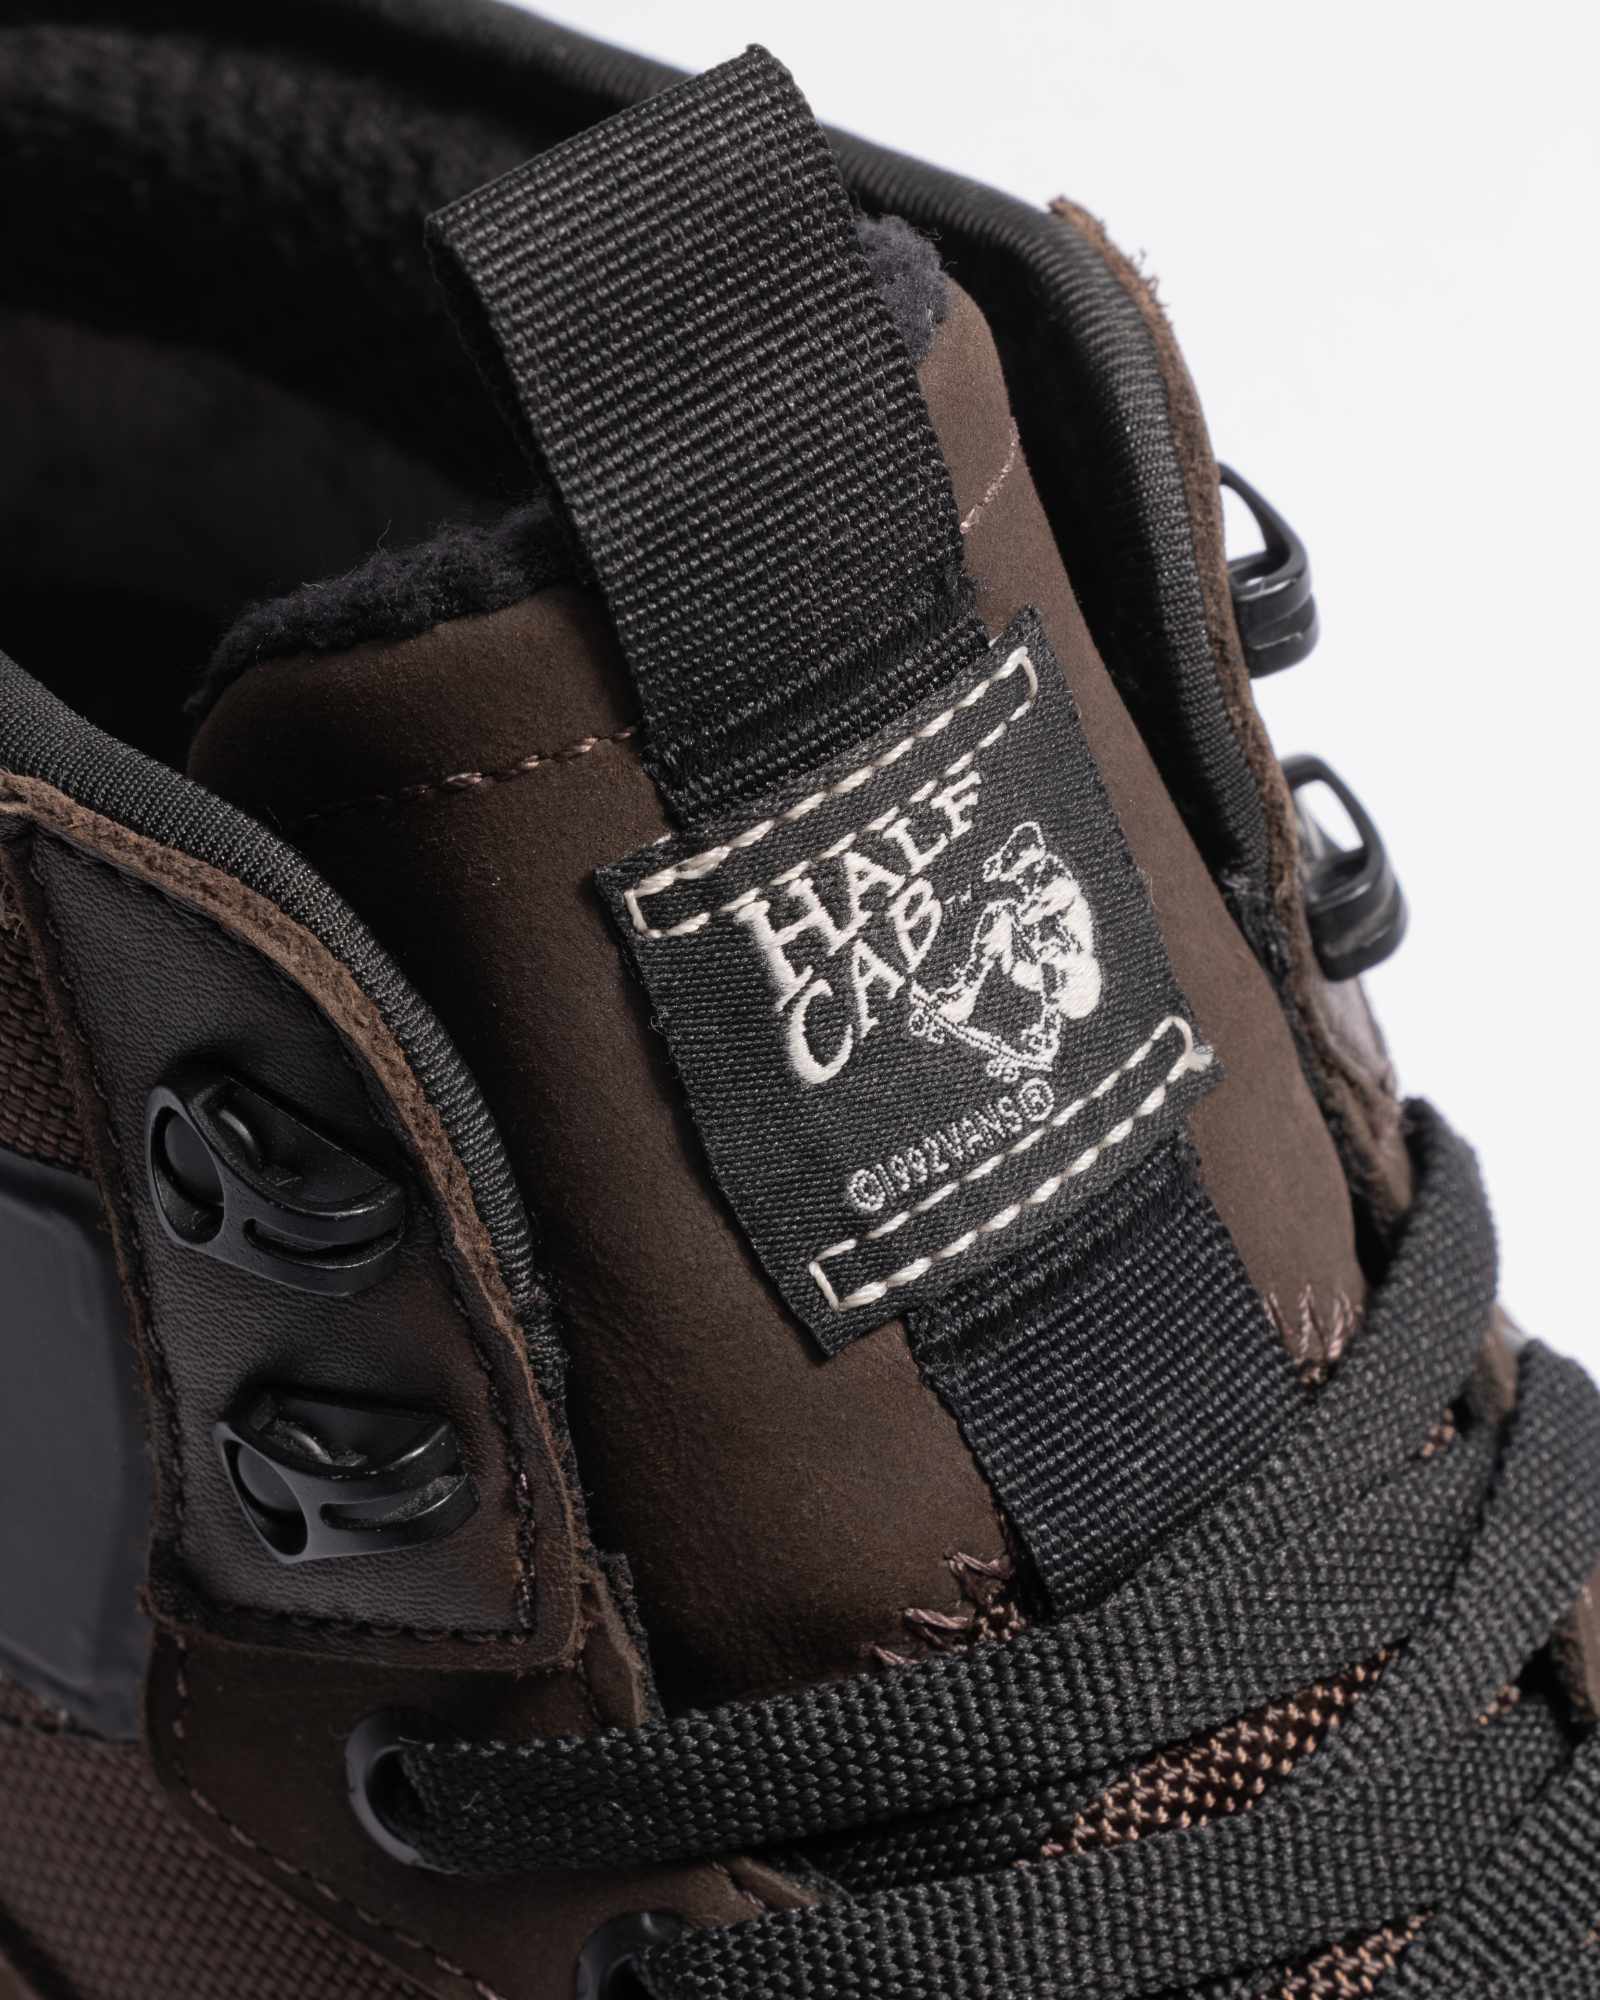 Vans Tokyo Design Collective's first drop, including GORE-TEX Sk8-Hi sneakers and technical clothes